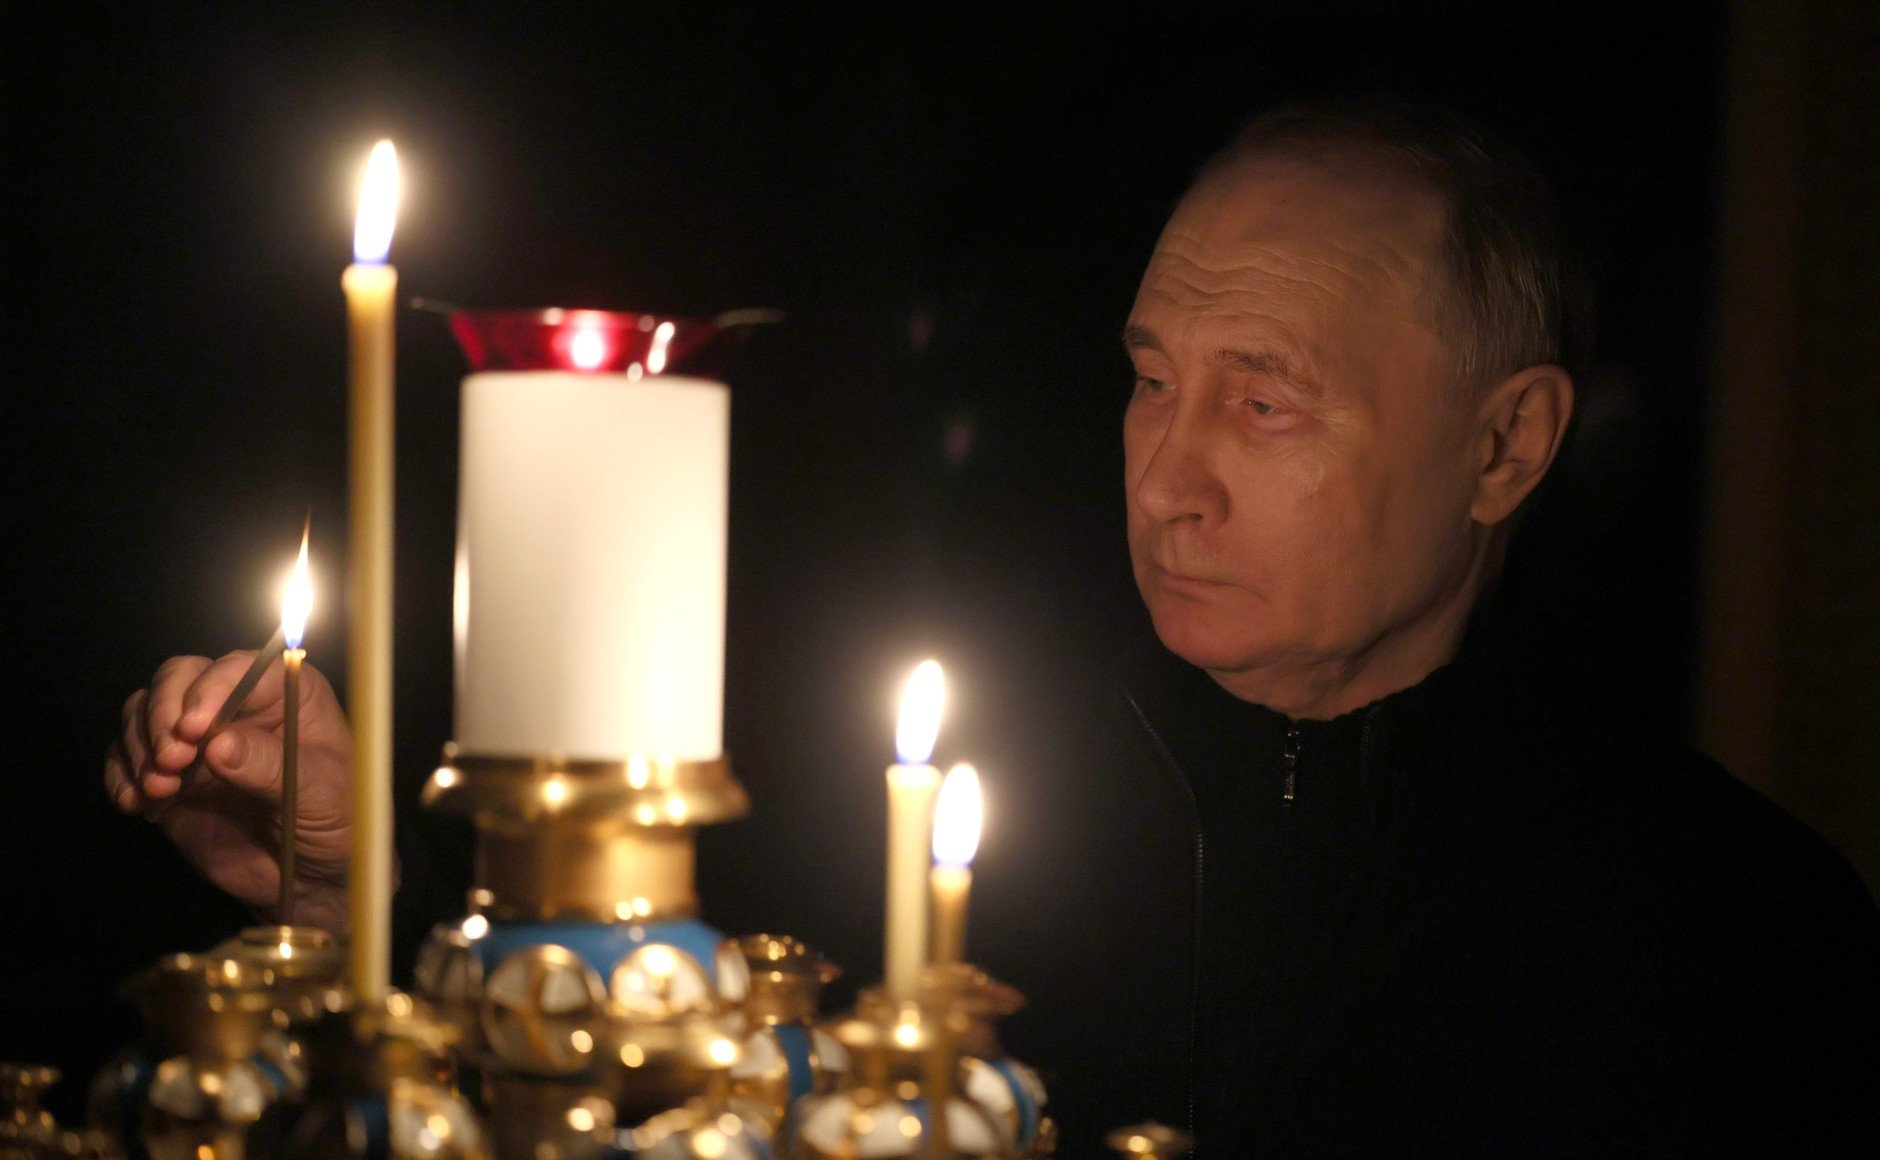 In this photo from the Kremlin, Russian President Vladimir Putin lights a candle in memory of victims of the Crocus City Hall attack, at the Novo-Ogaryovo residence in the Moscow region, on March 24.